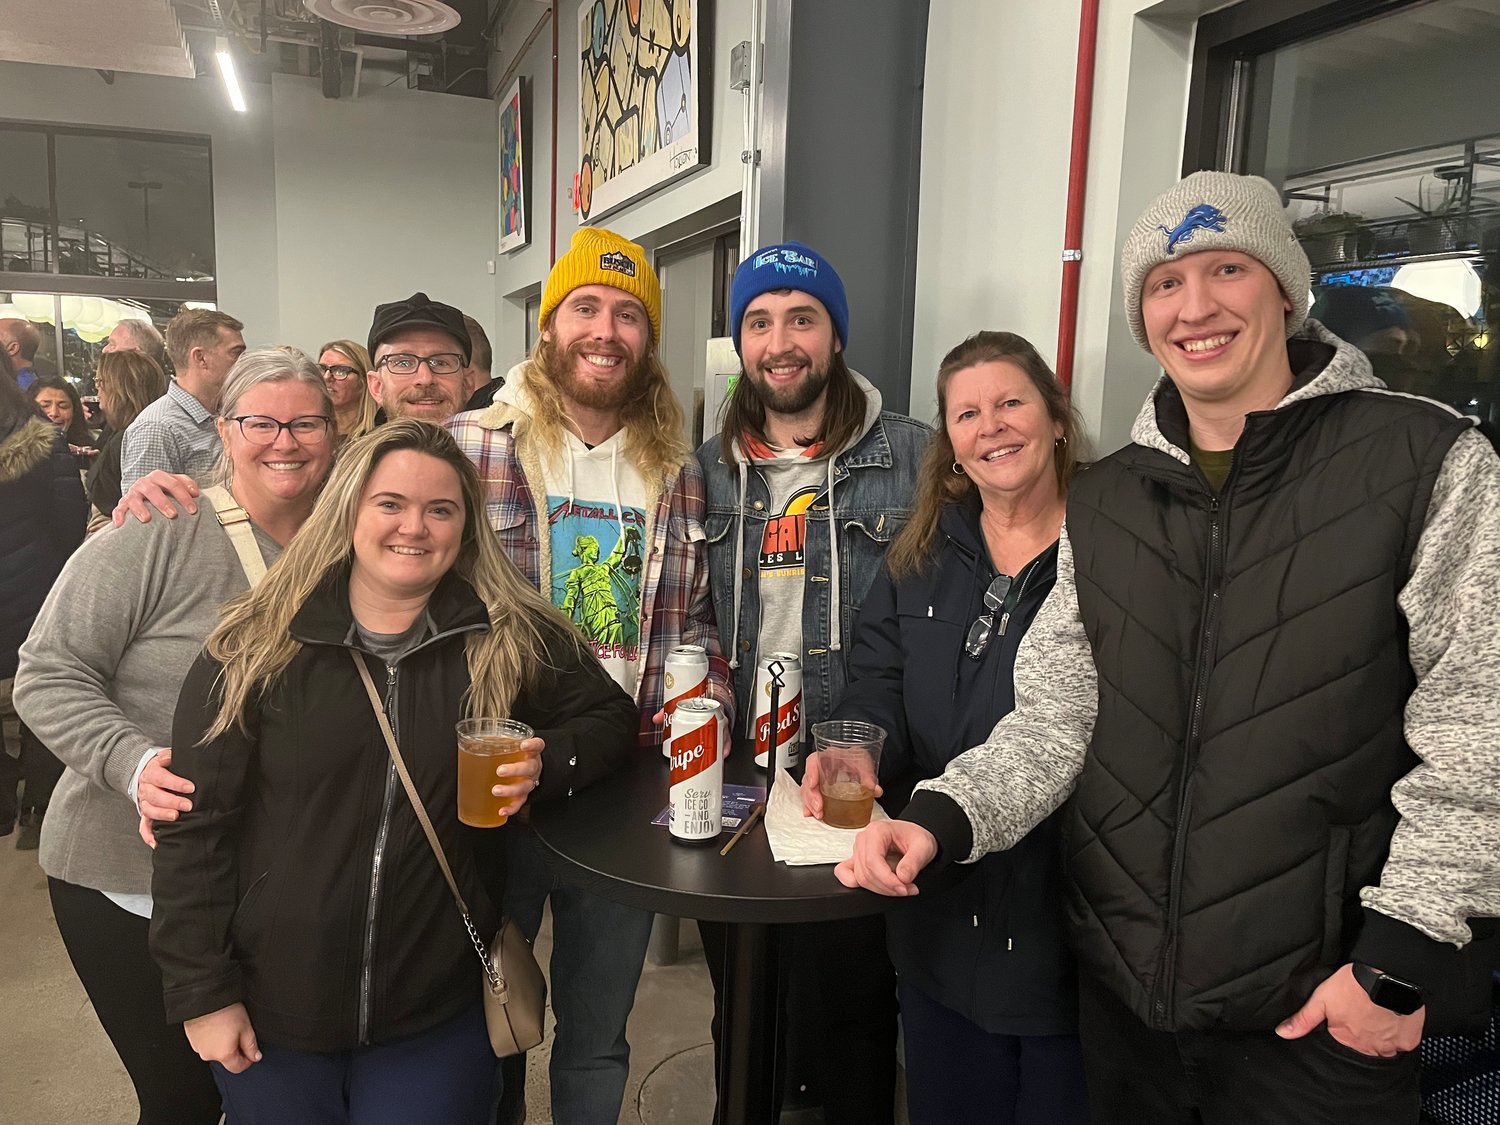 The Farr and Reynolds families enjoy drinks from the bar. “It’s nice to have something in the winter that’s inside,” said Andrea Farr (far left).